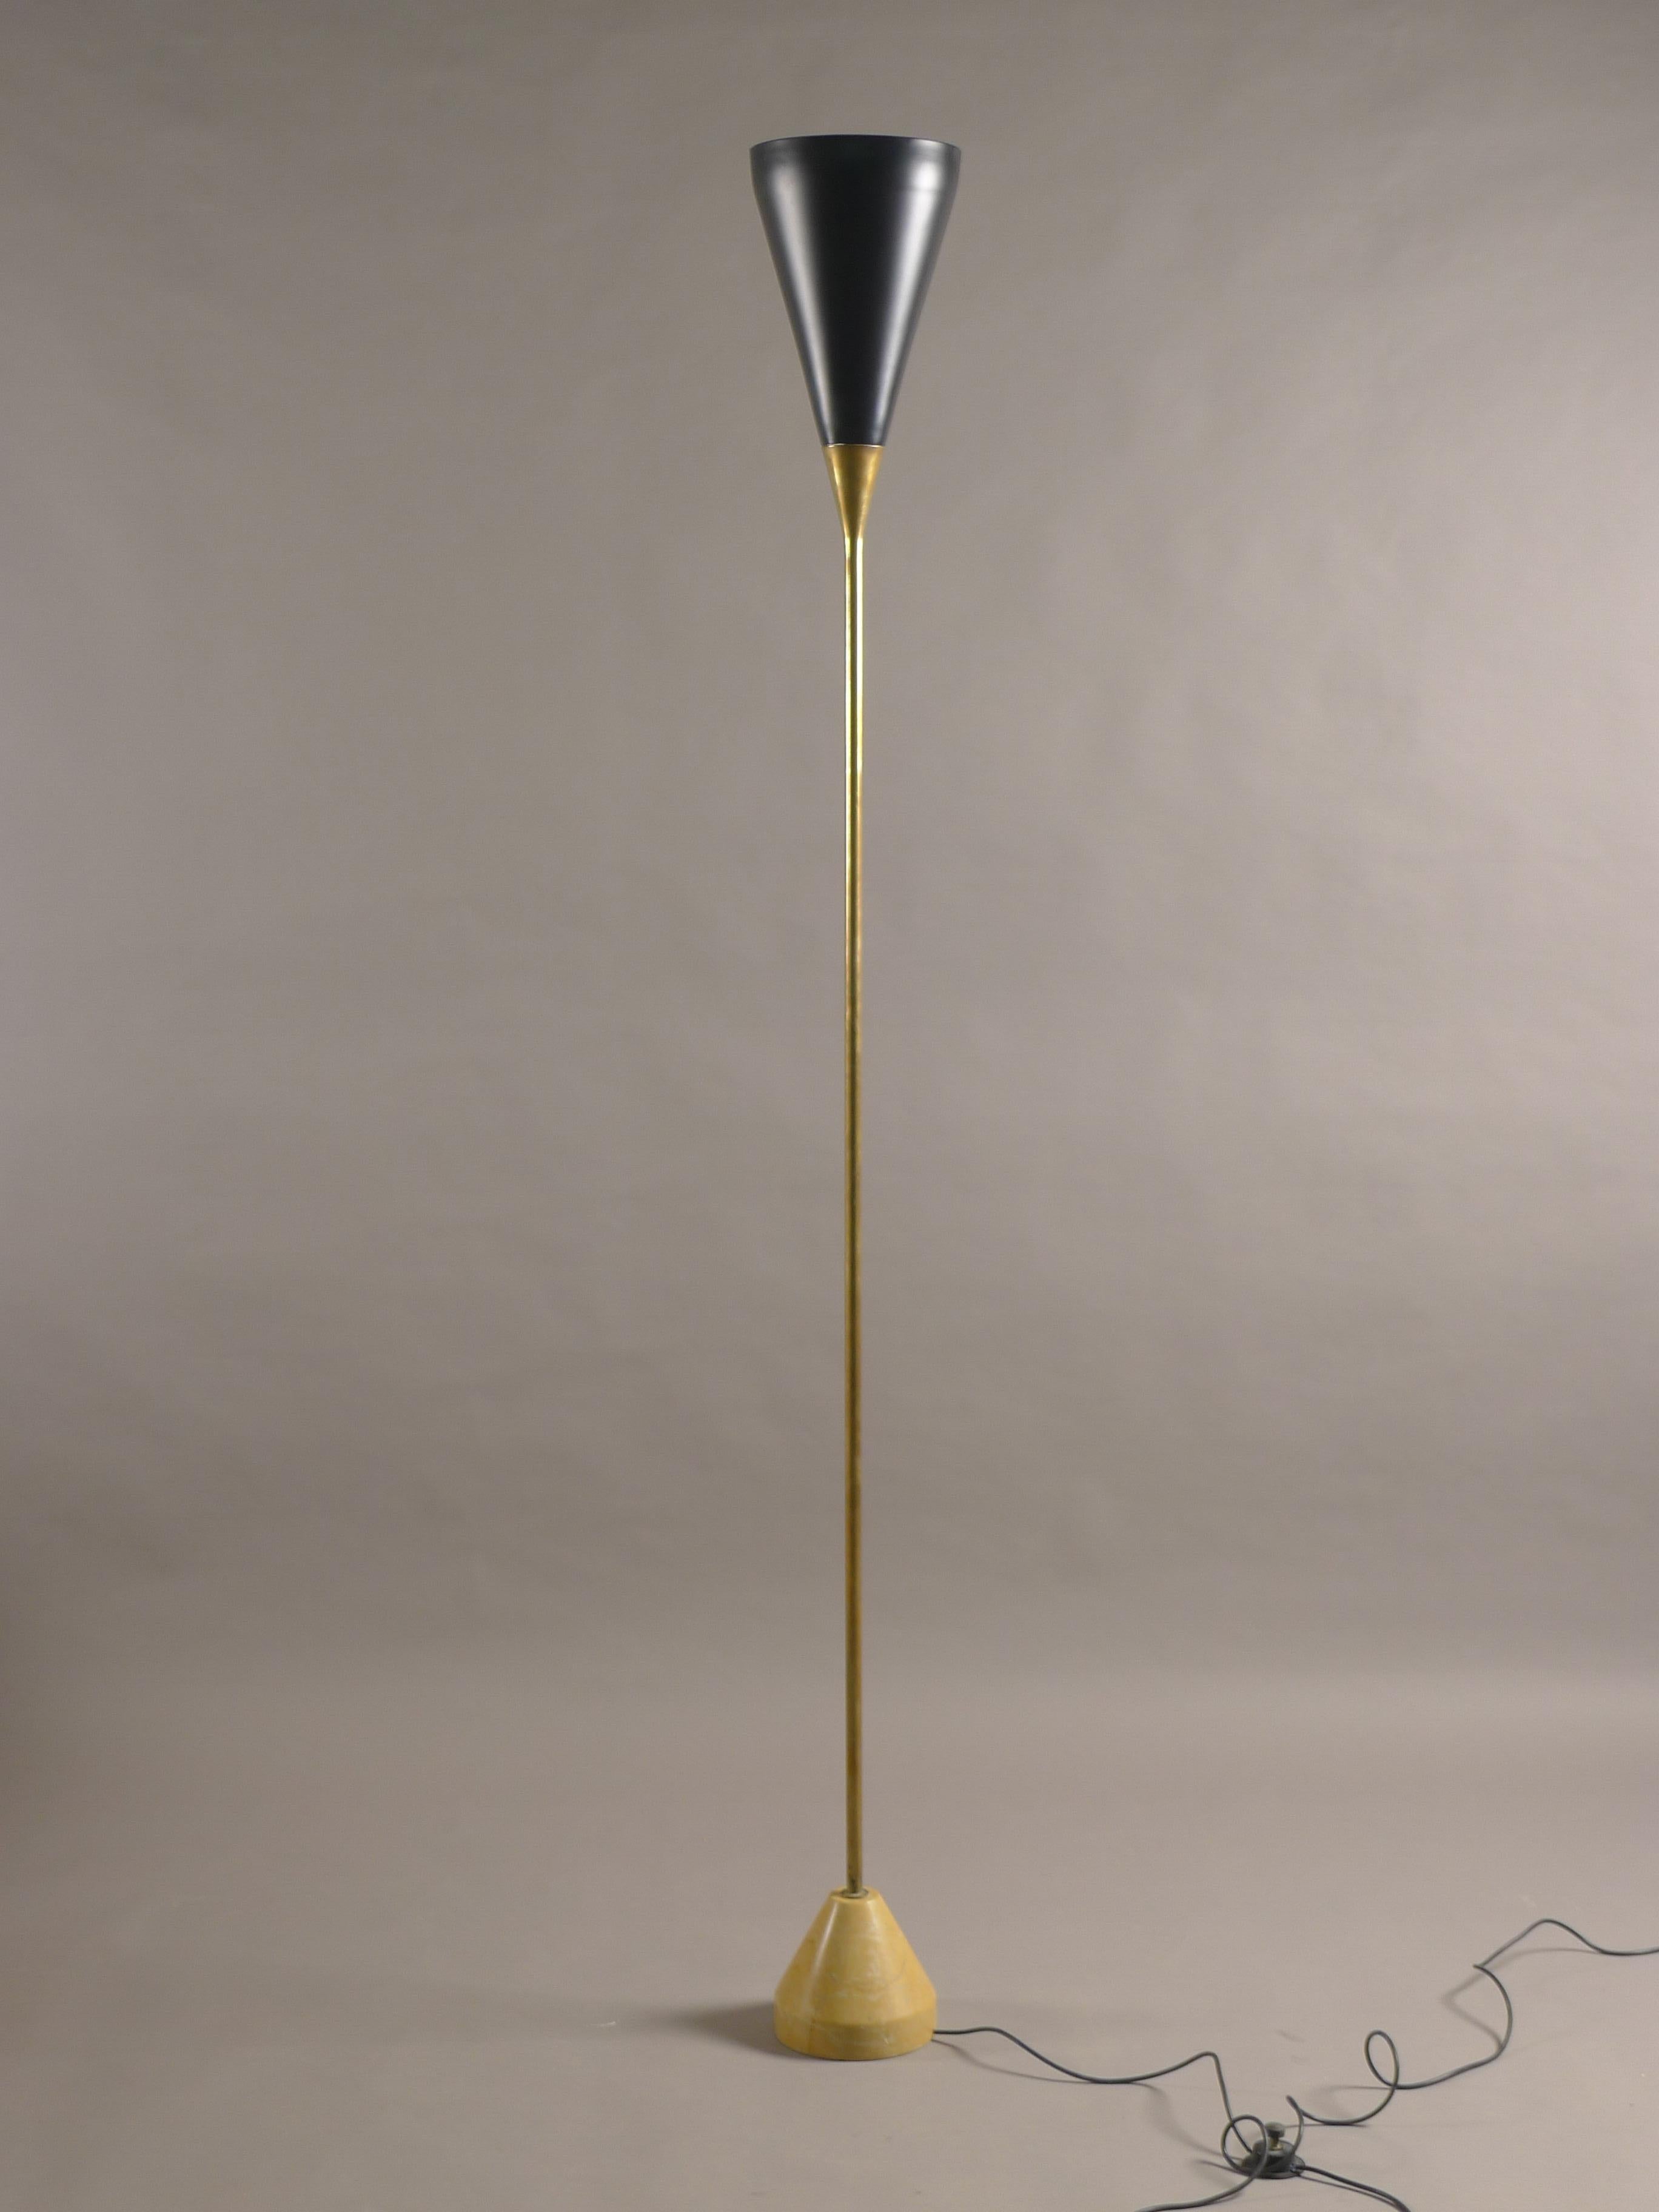 Franco Buzzi for Oluce , Italy , model B-30 1952 . Formed marble base with brass stem and black enamelled metasl shade . 

Original floor switch , nice patination to all parts . 